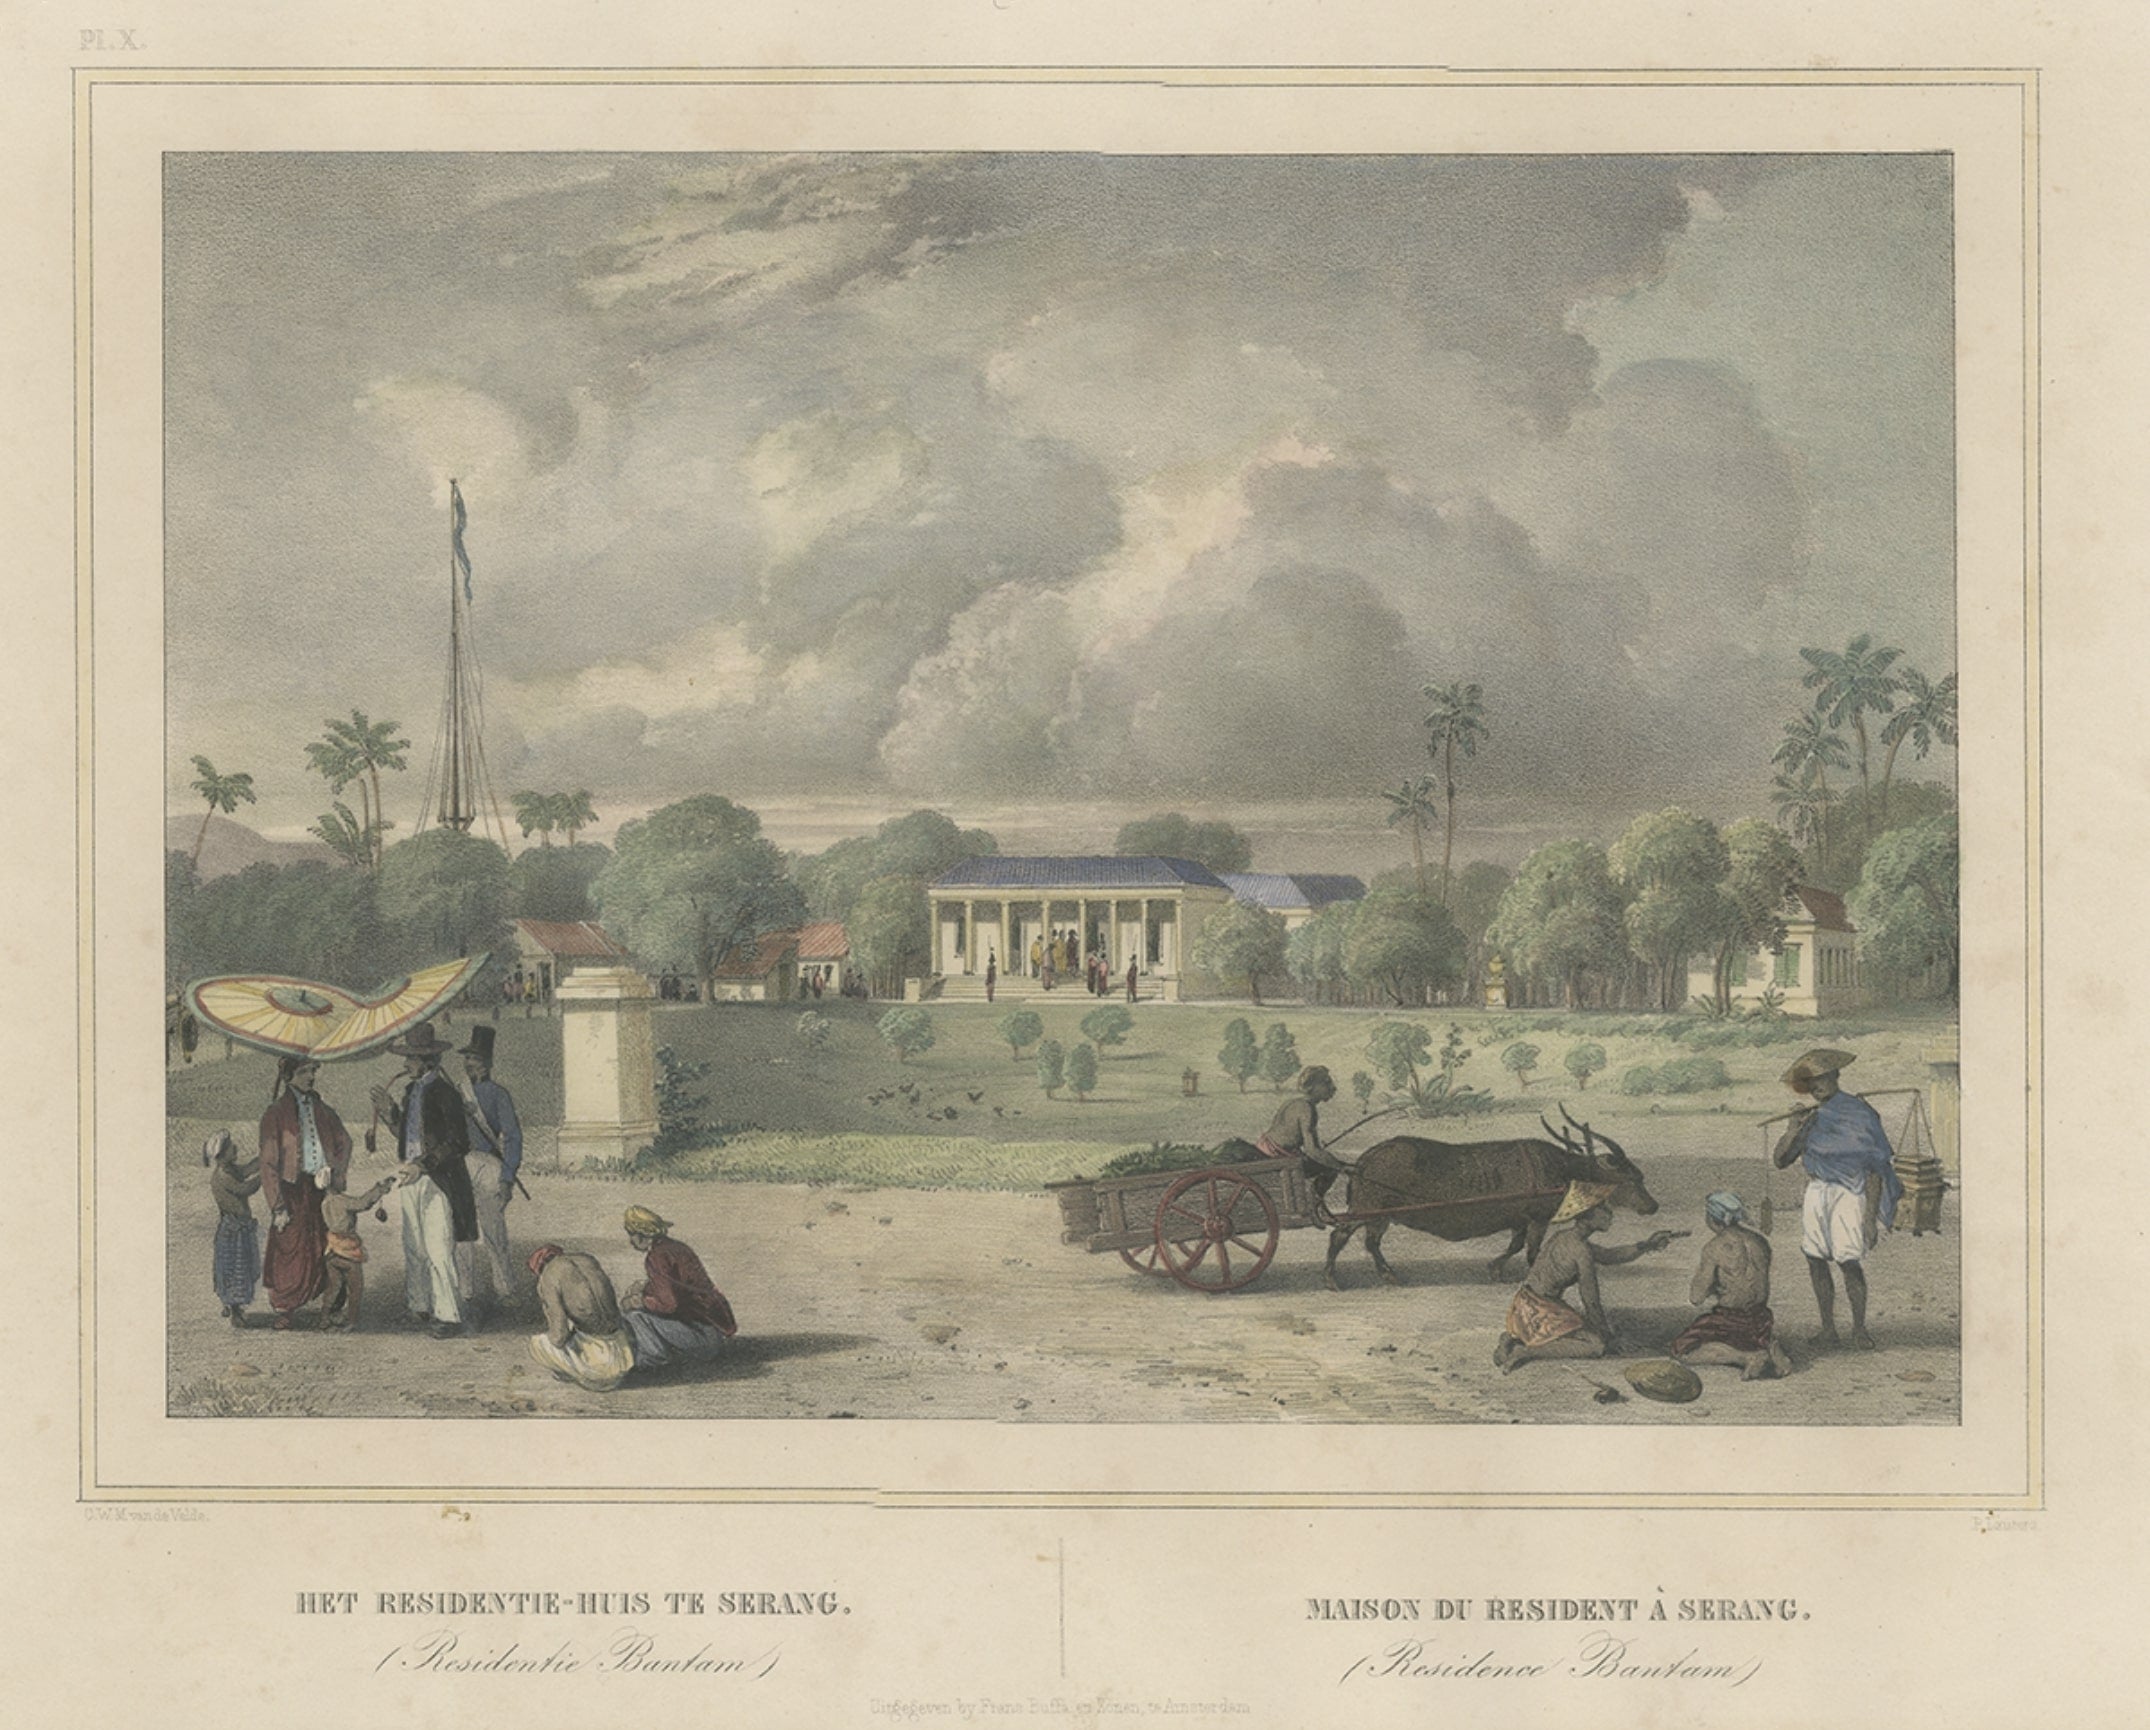 Antique Print of the Residence House in Serang, Java, Indonesia, 1844 For Sale